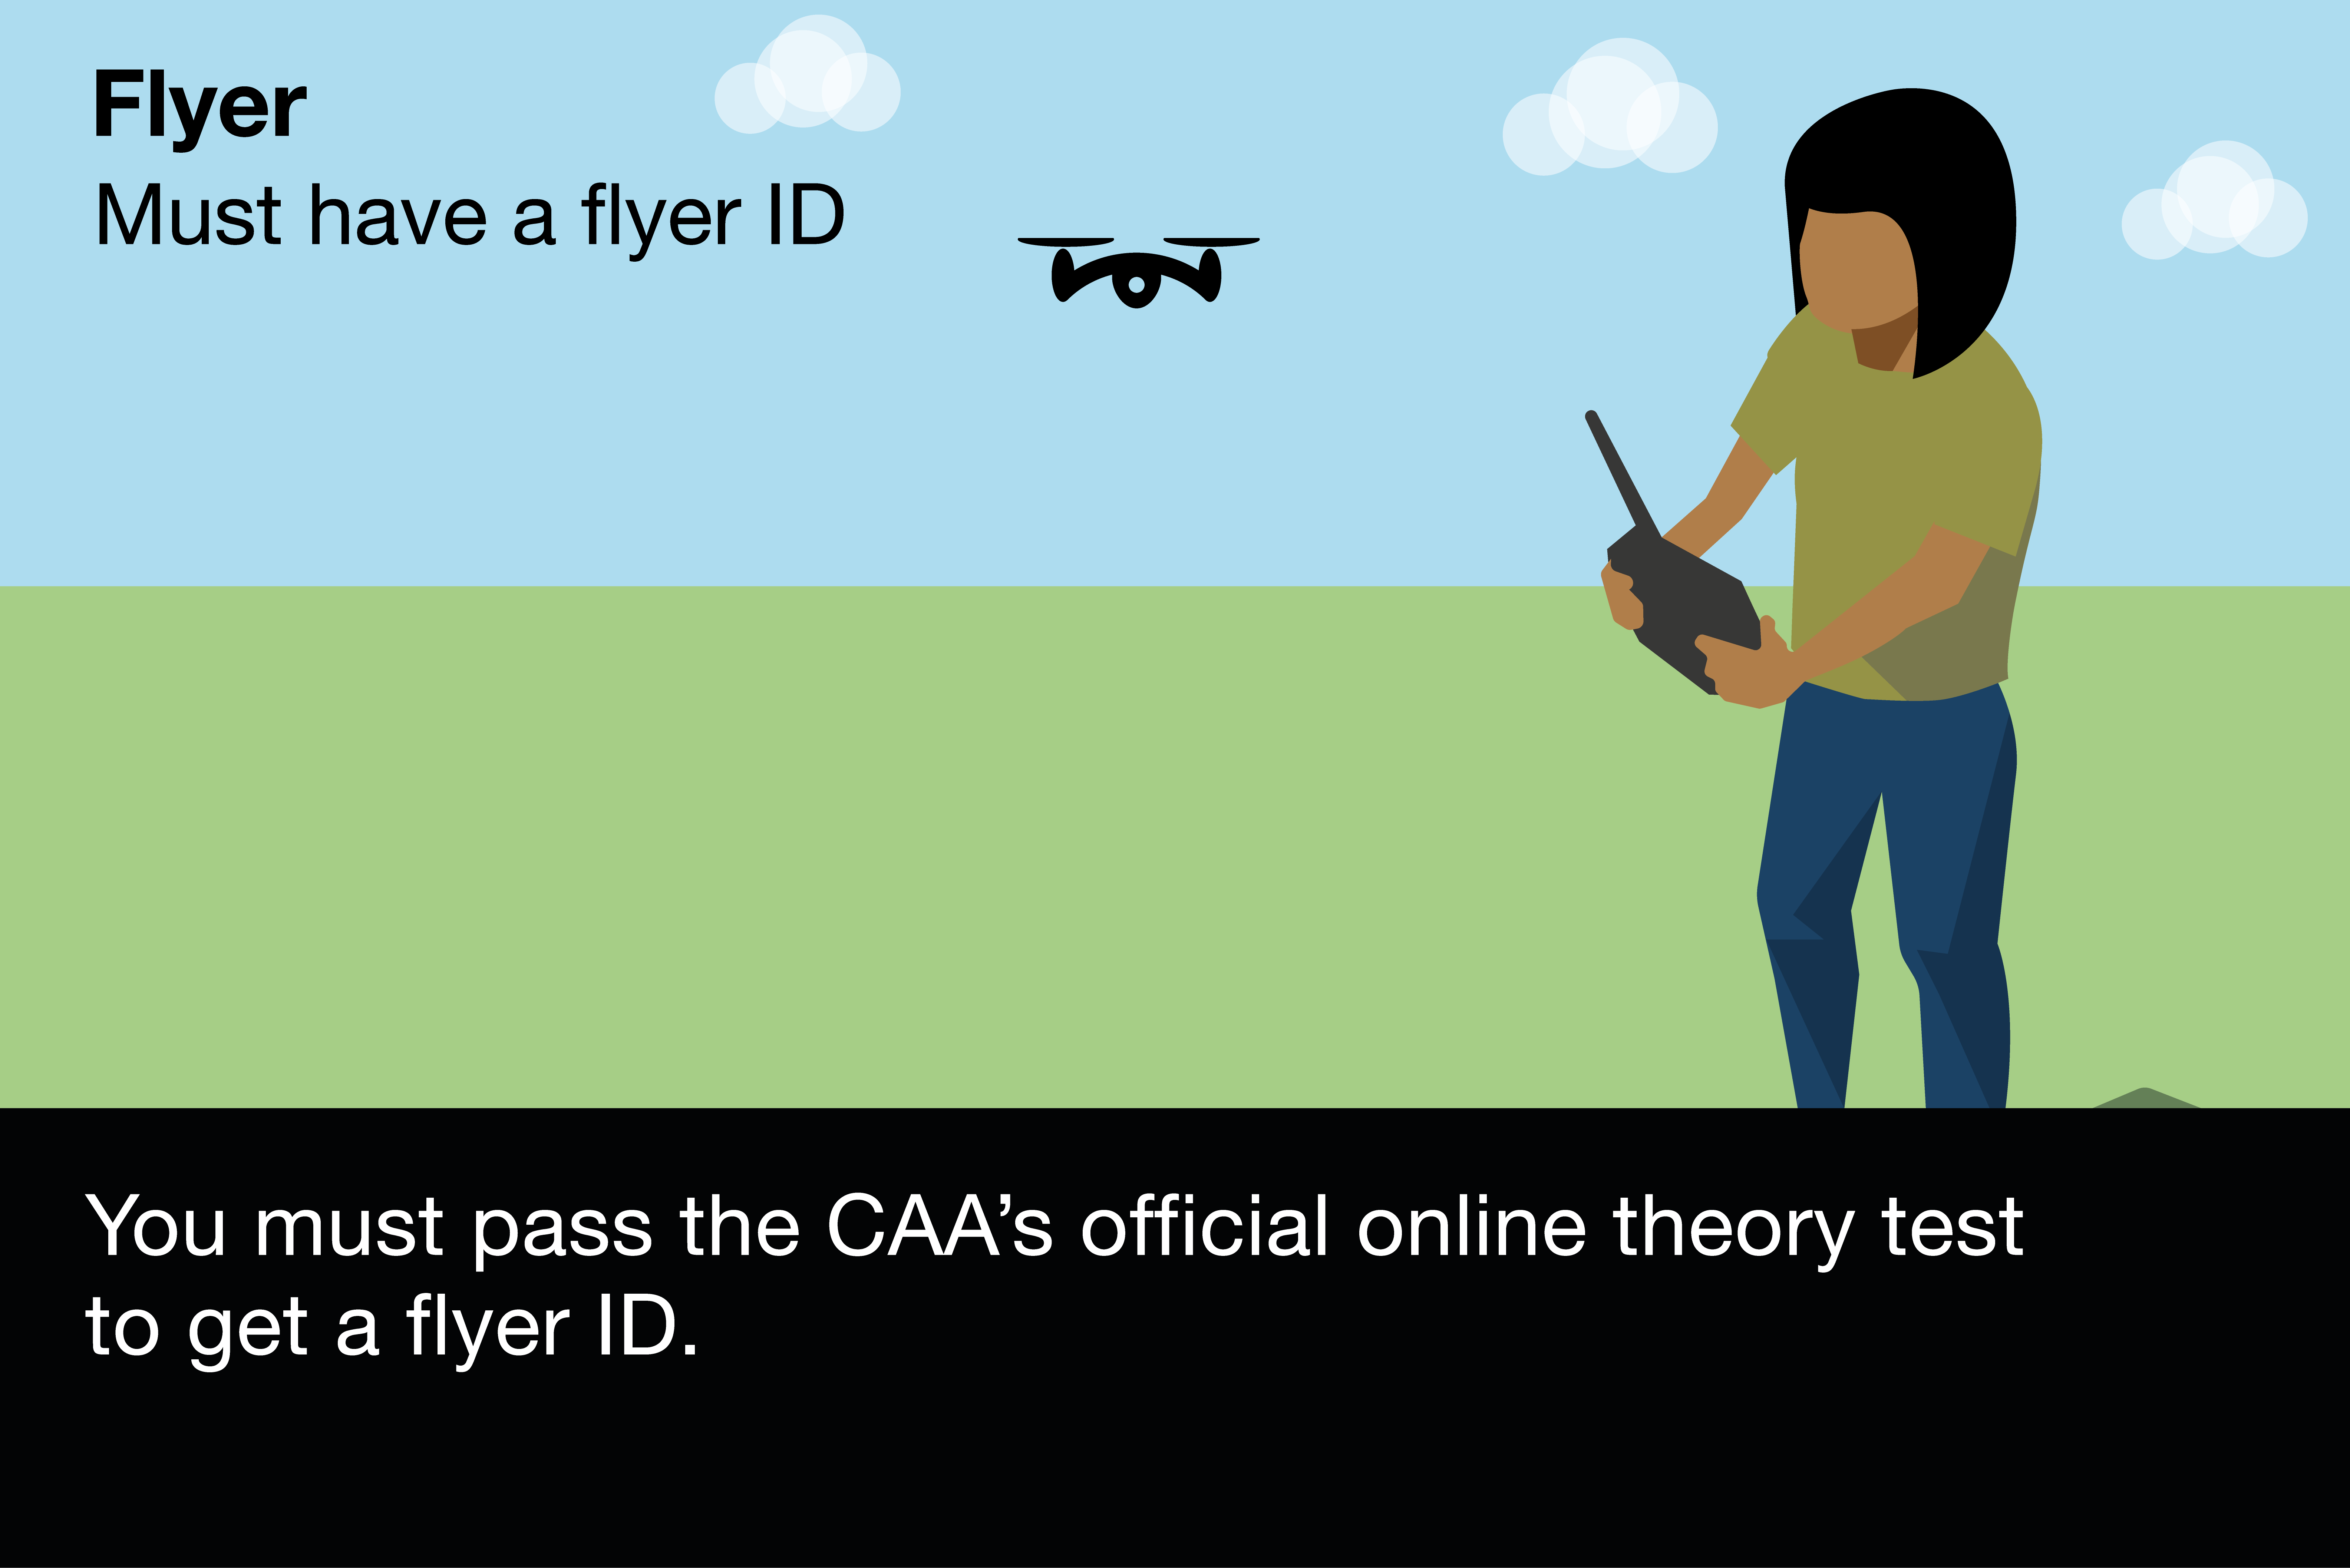 You must pass the CAA's official online theory test to get a flyer ID.